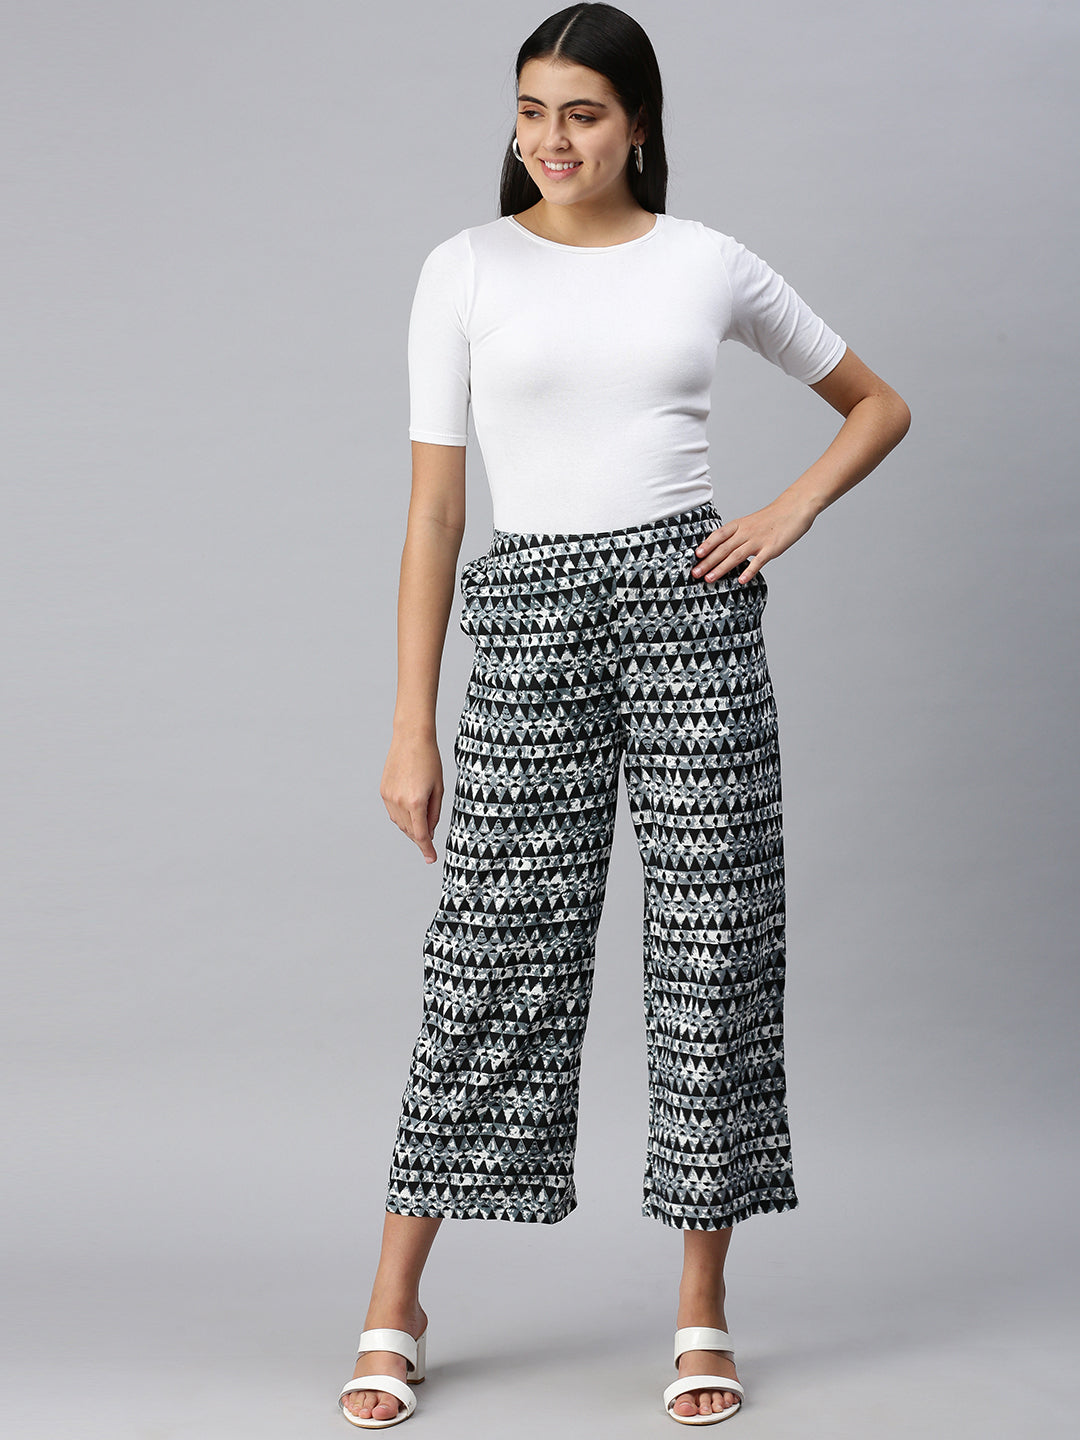 Discover more than 124 ladies black palazzo trousers latest